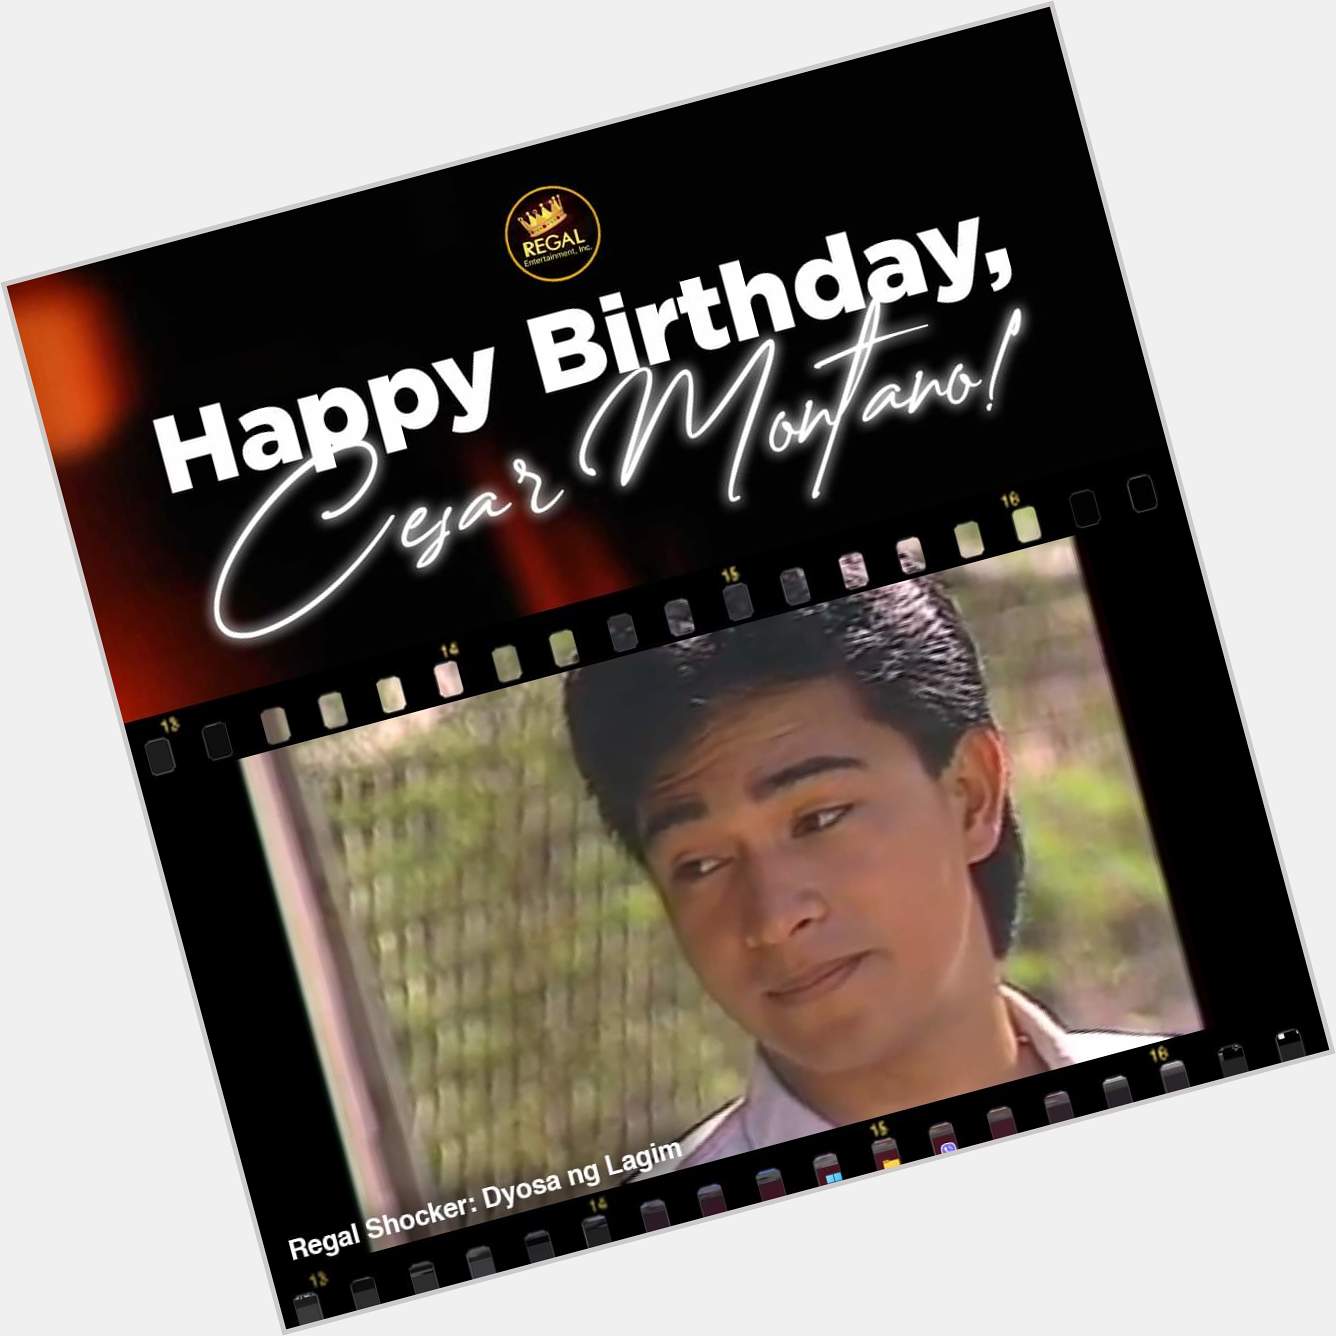 Happy Birthday, Cesar Montano! We wish you all the best in life! From your Regal Family! 